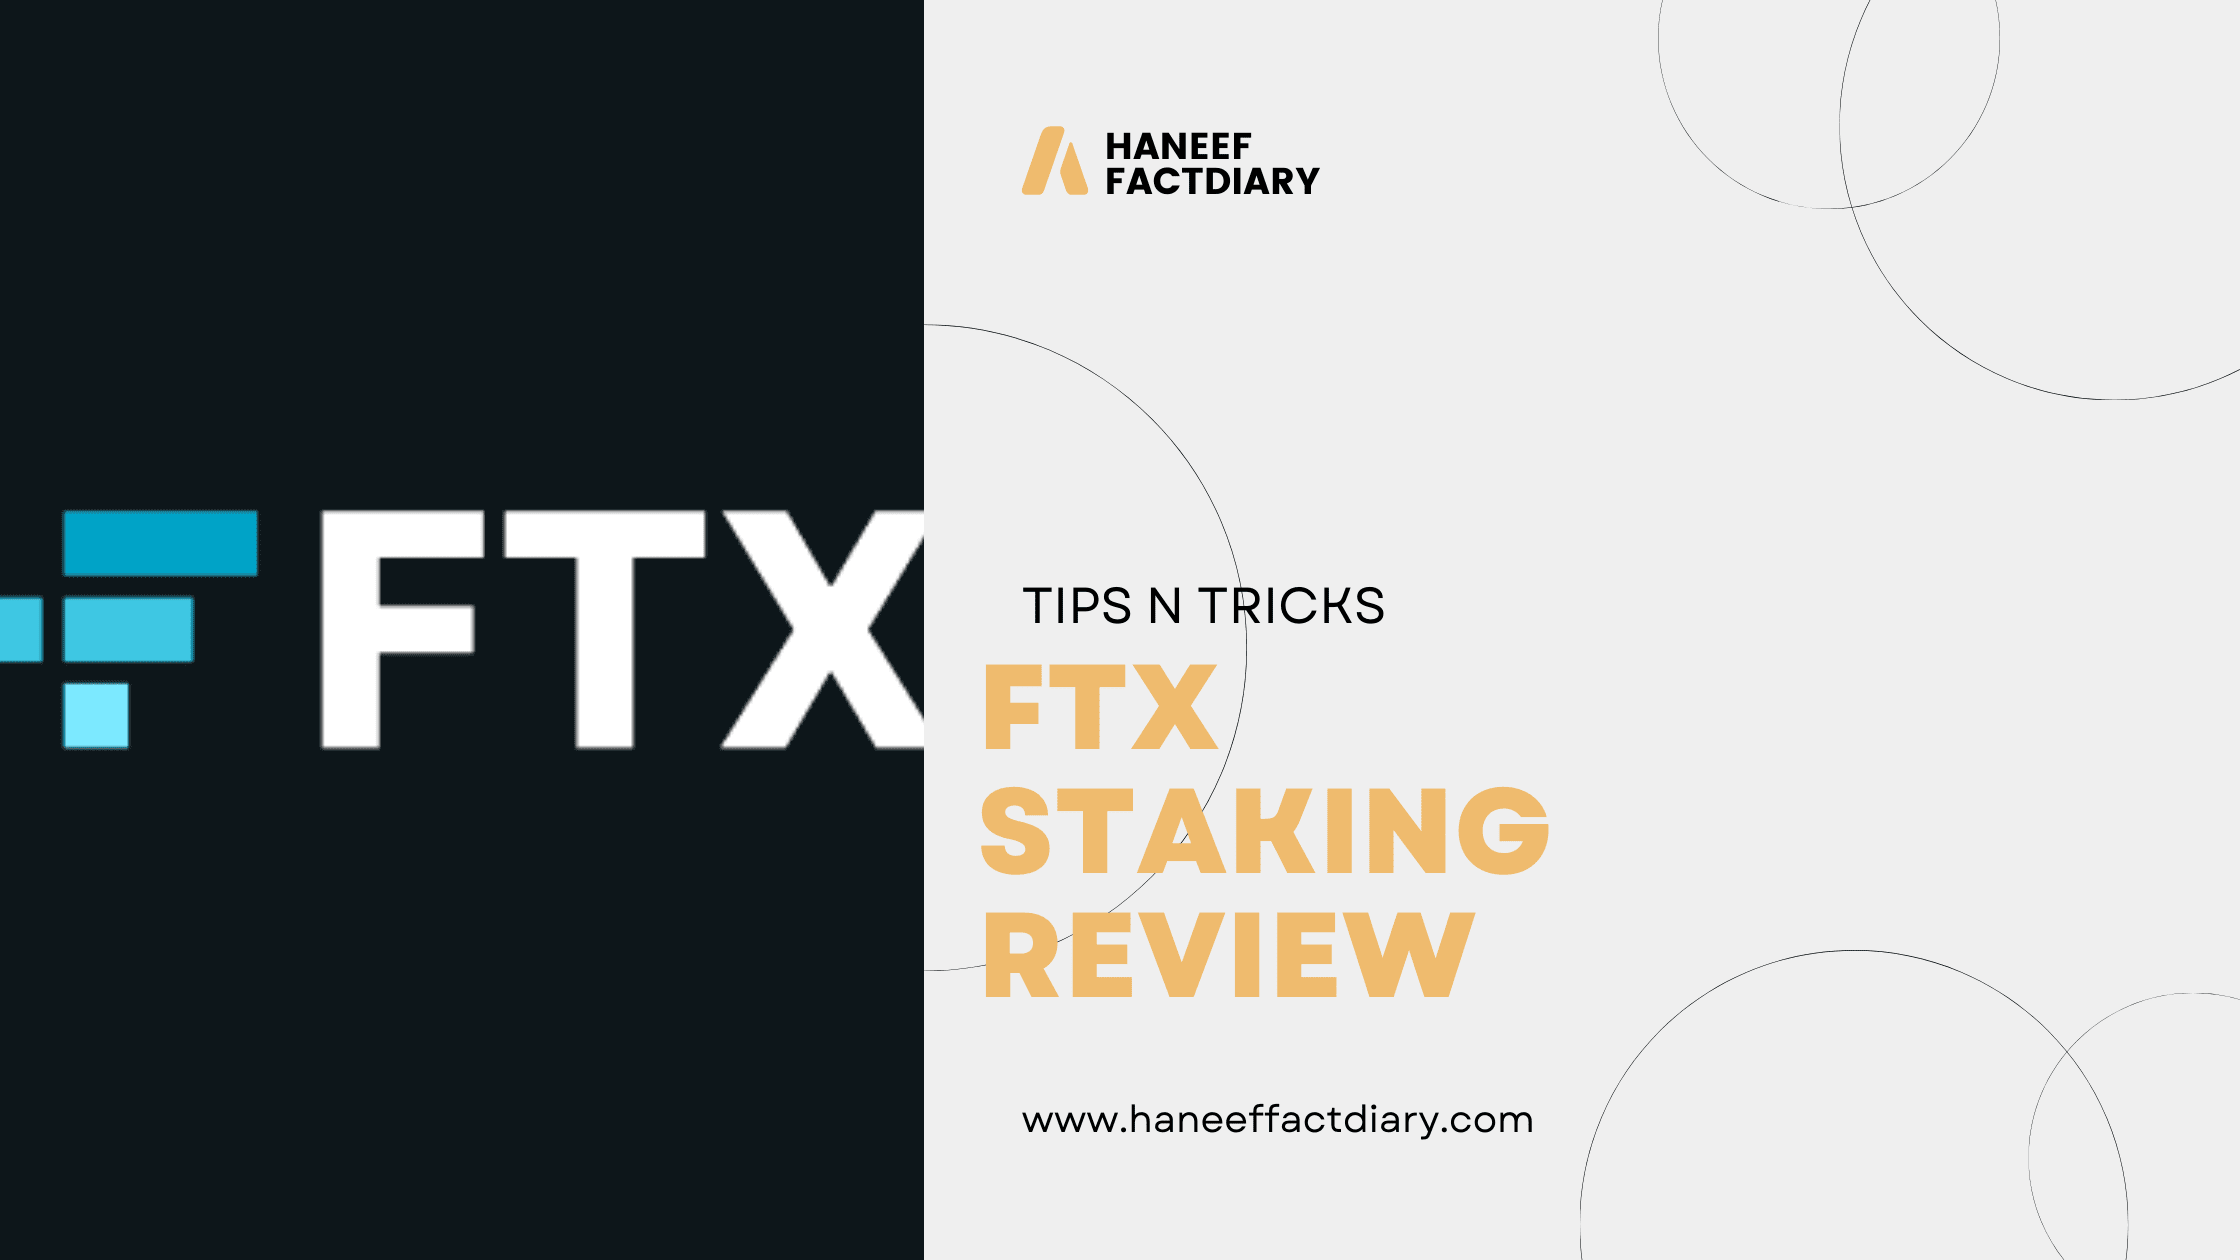 FTX Staking Review